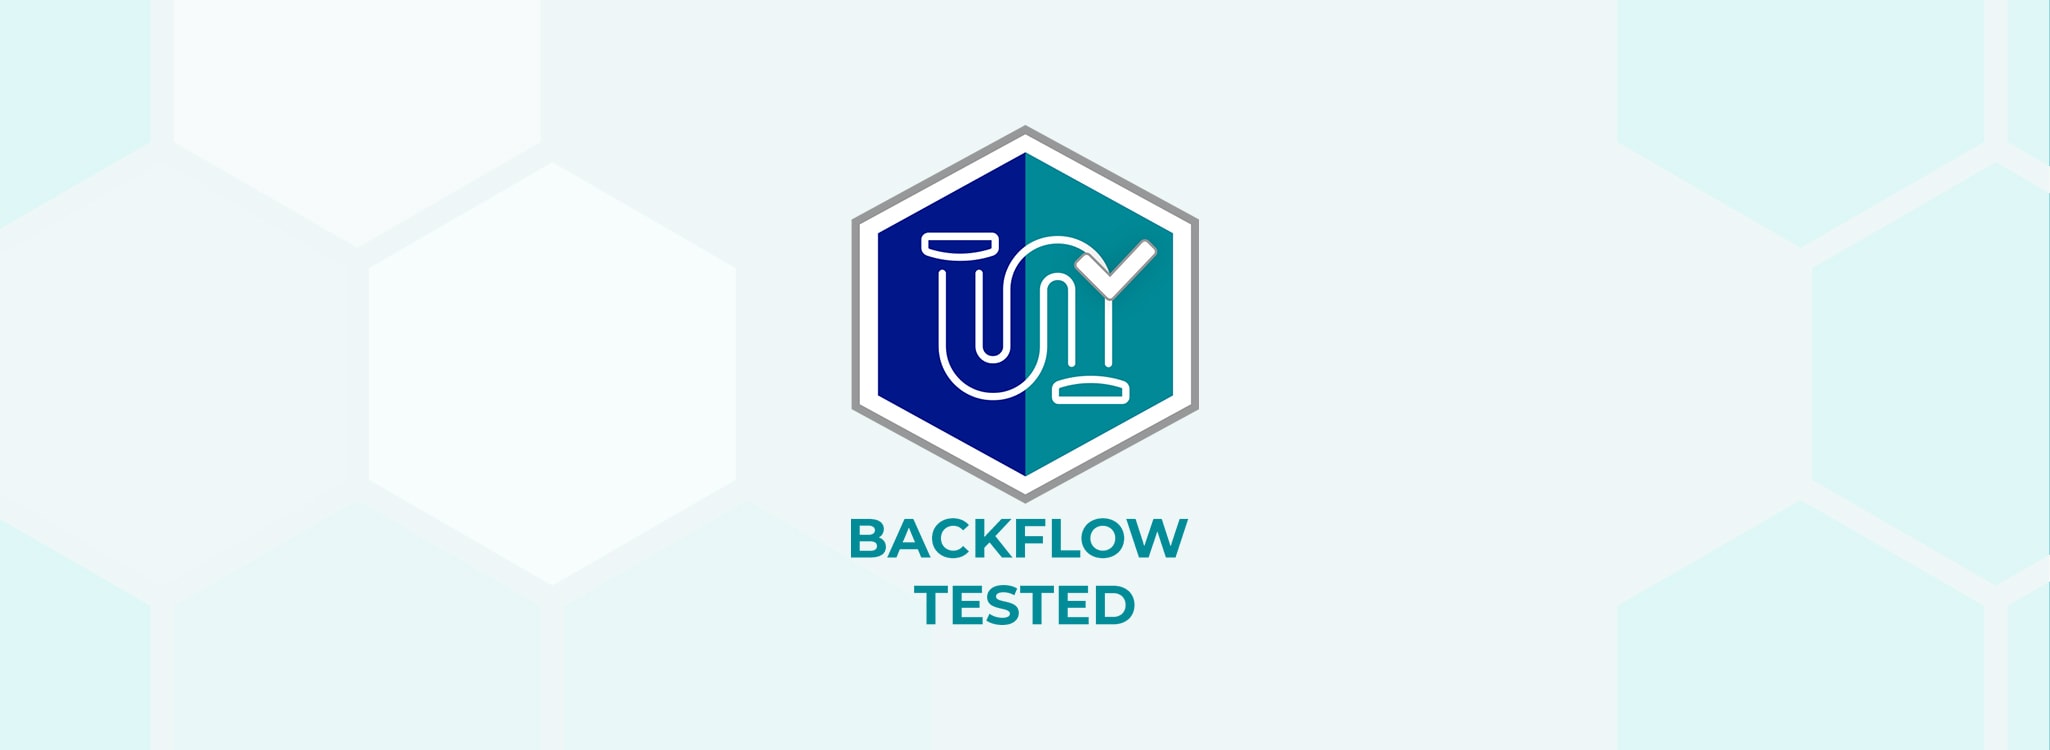 Backflow Tested banner